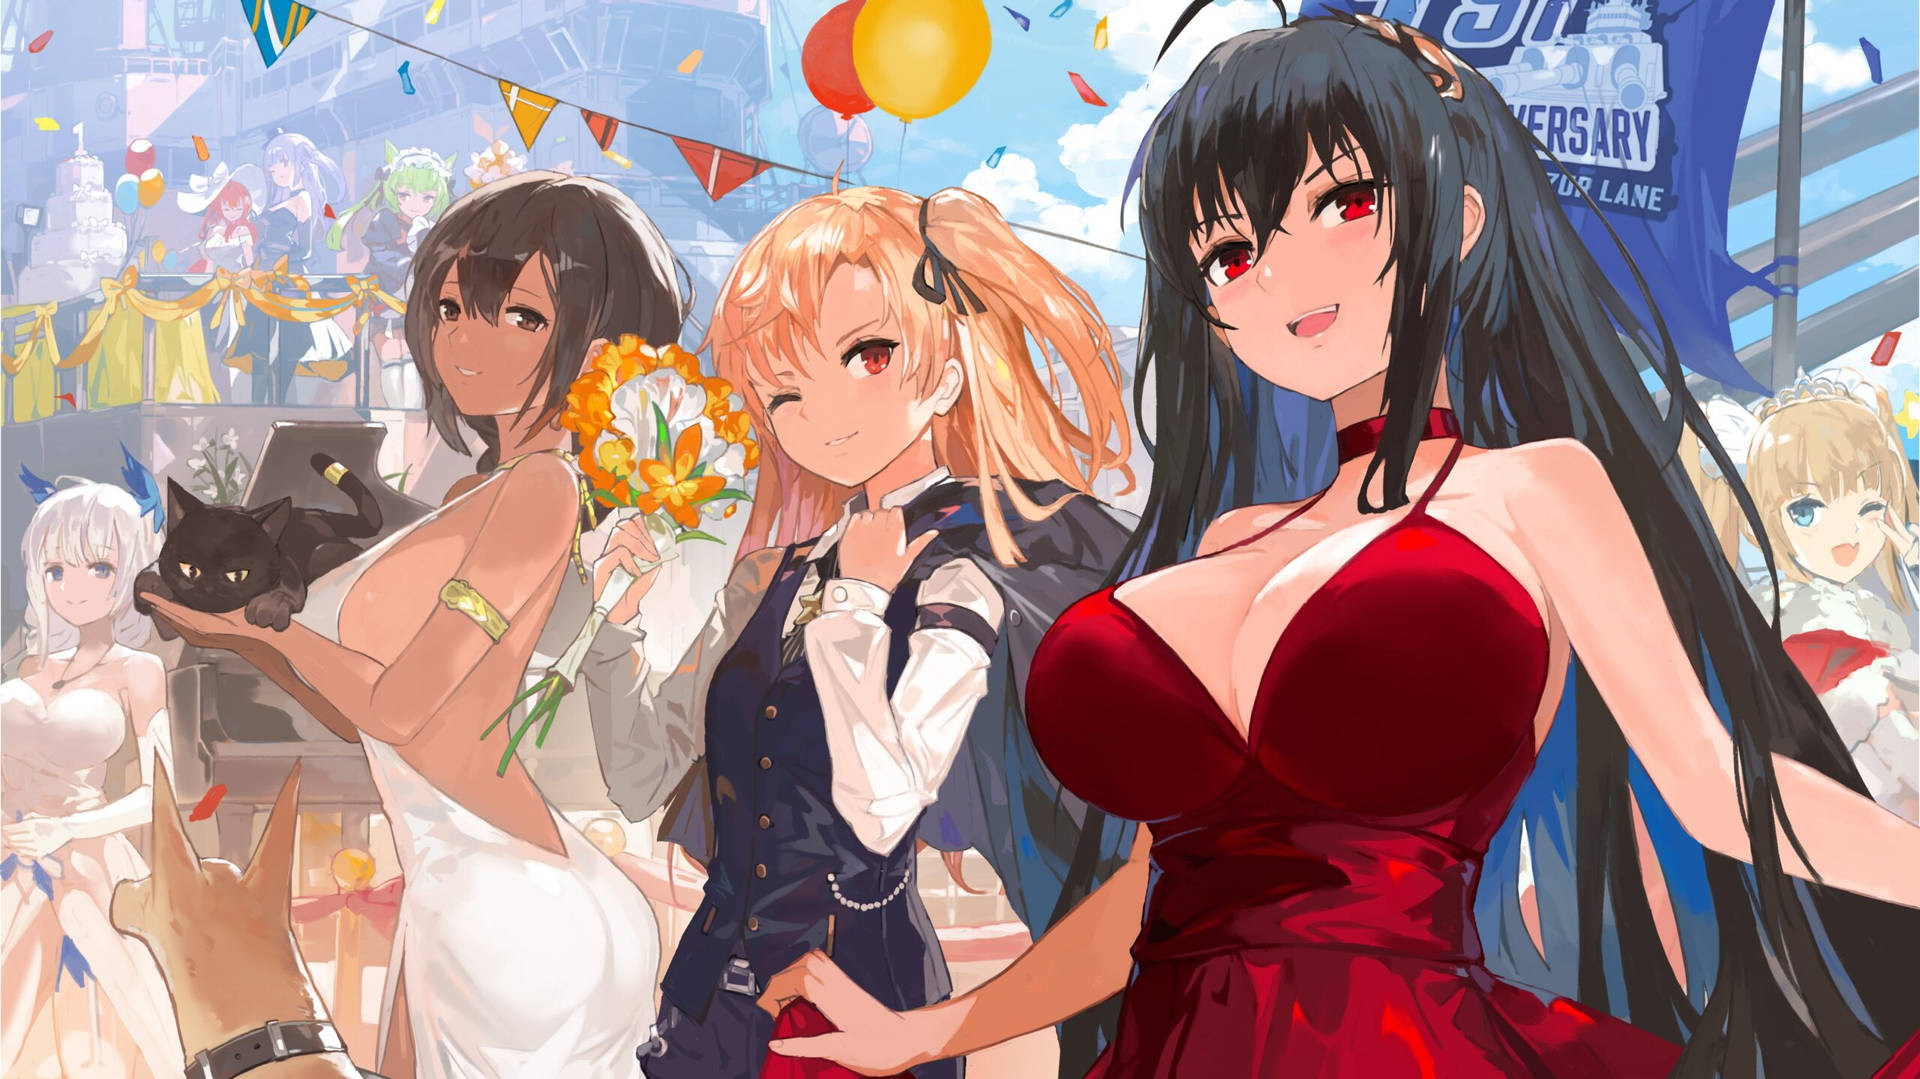 Celebrate the One Year Anniversary of Azur Lane with a Party Wallpaper